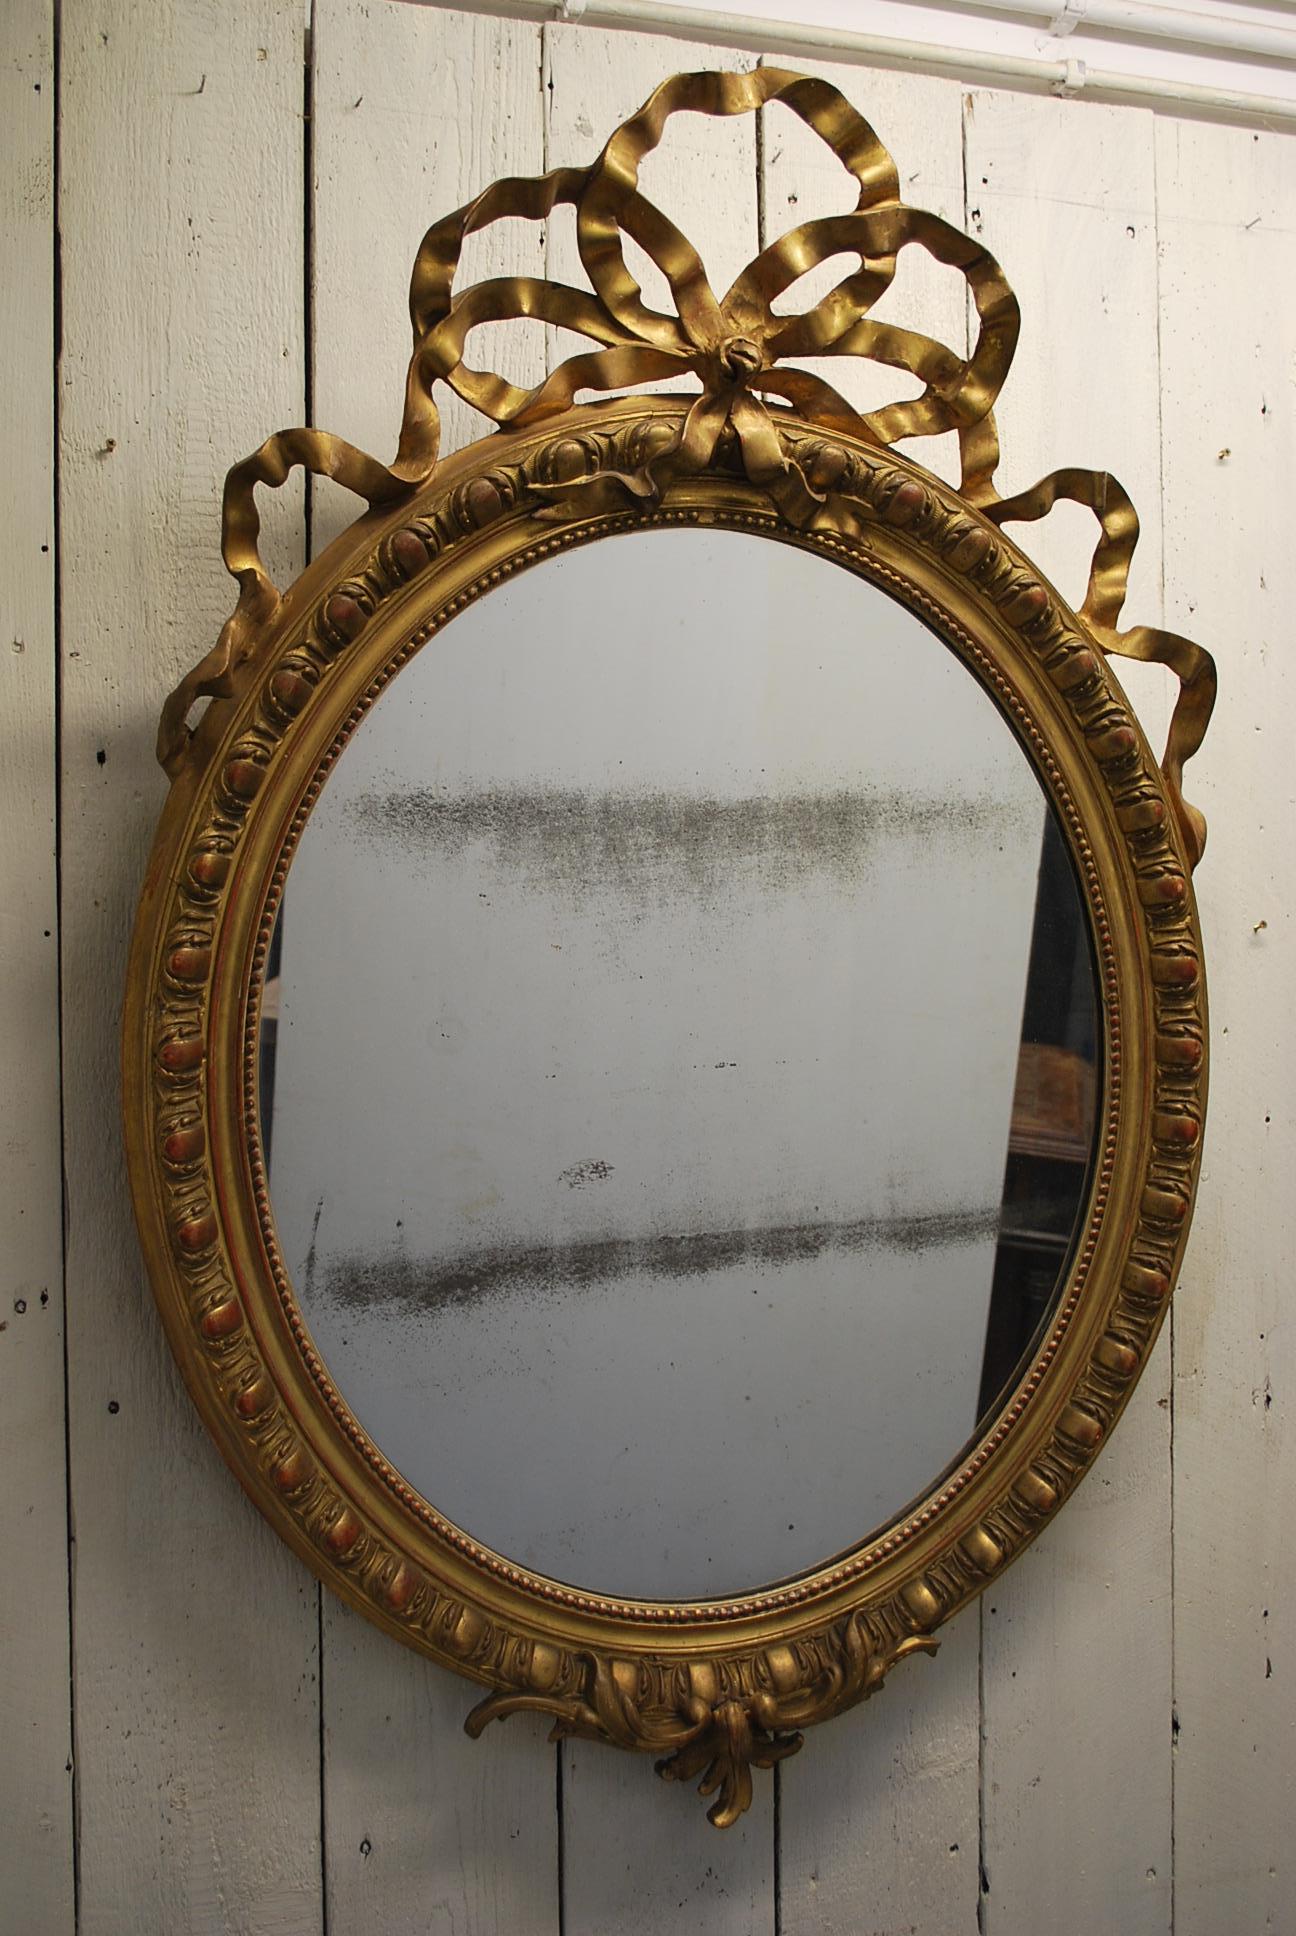 This is a large 19th century, French antique overmantle mirror with a ribbon crown and an egg and dart border. Original foxed looking glass and lovely old pine back.